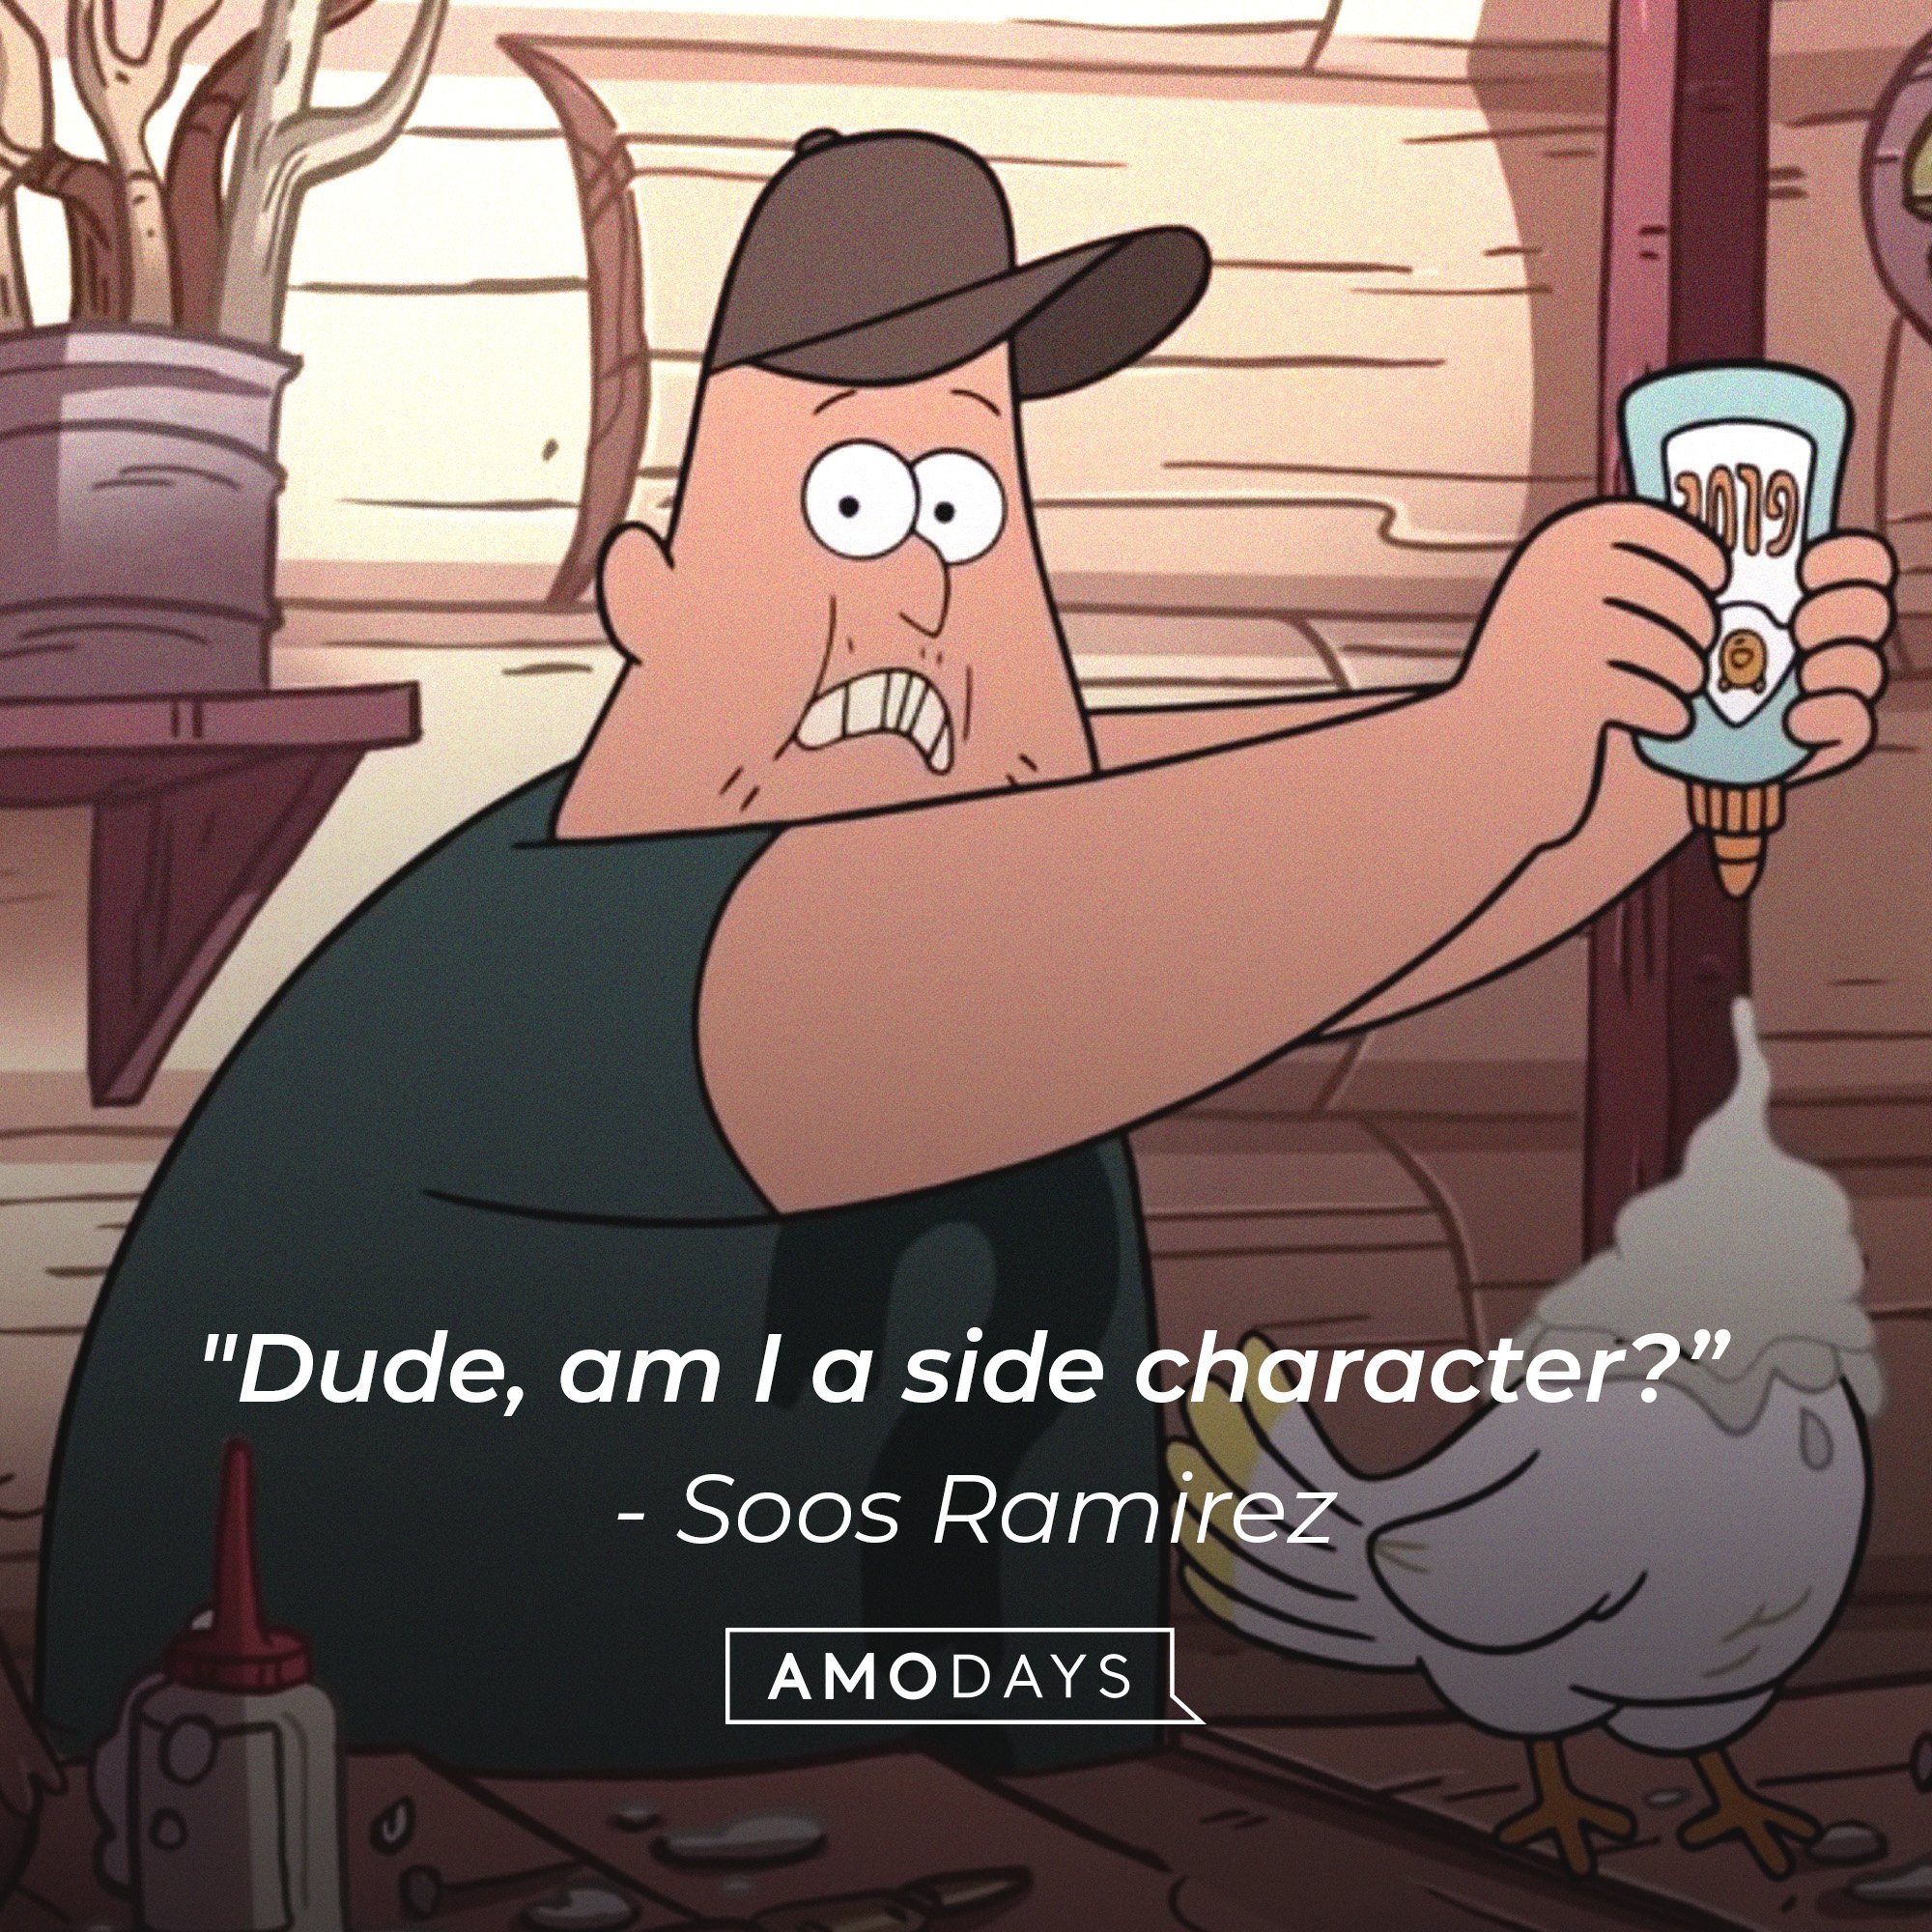 Soos Ramirez’s quote: "Dude, am I a side character?” | Image: AmoDays